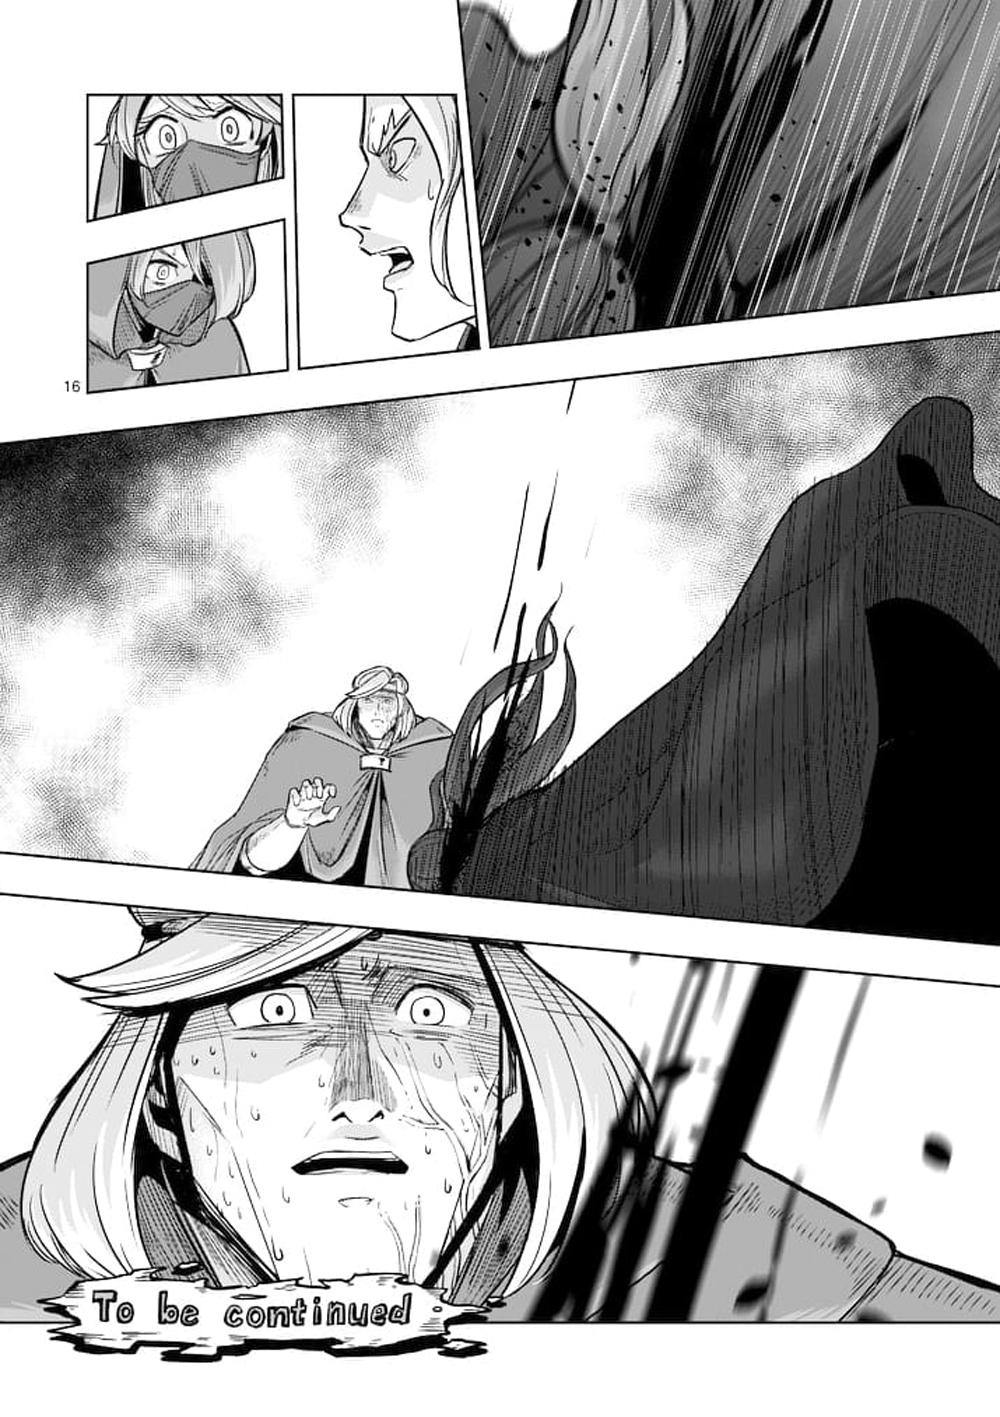 Helck Ch.48